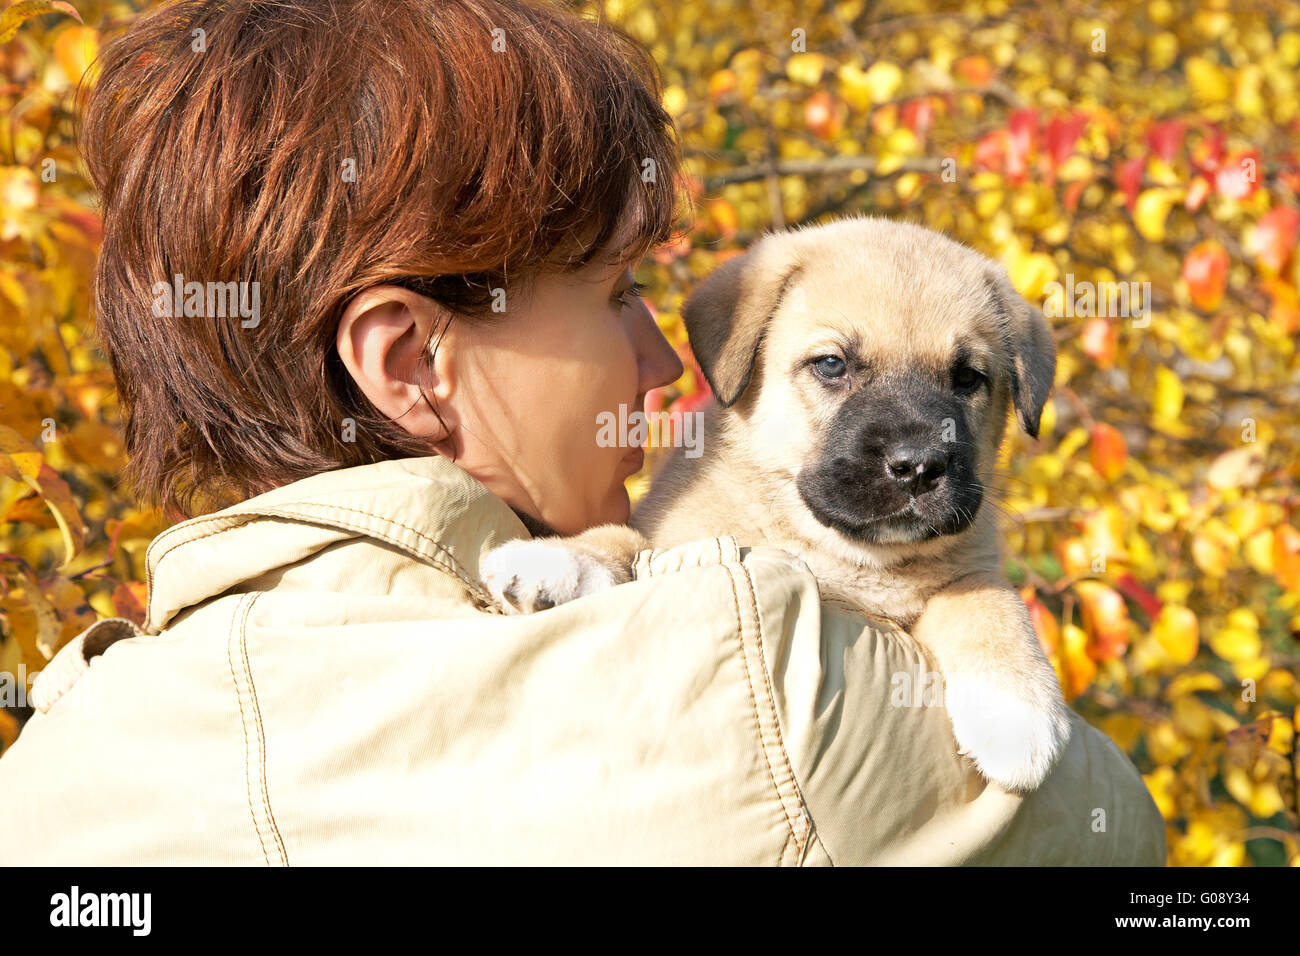 The woman with a puppy in hands against autumn leaves Stock Photo